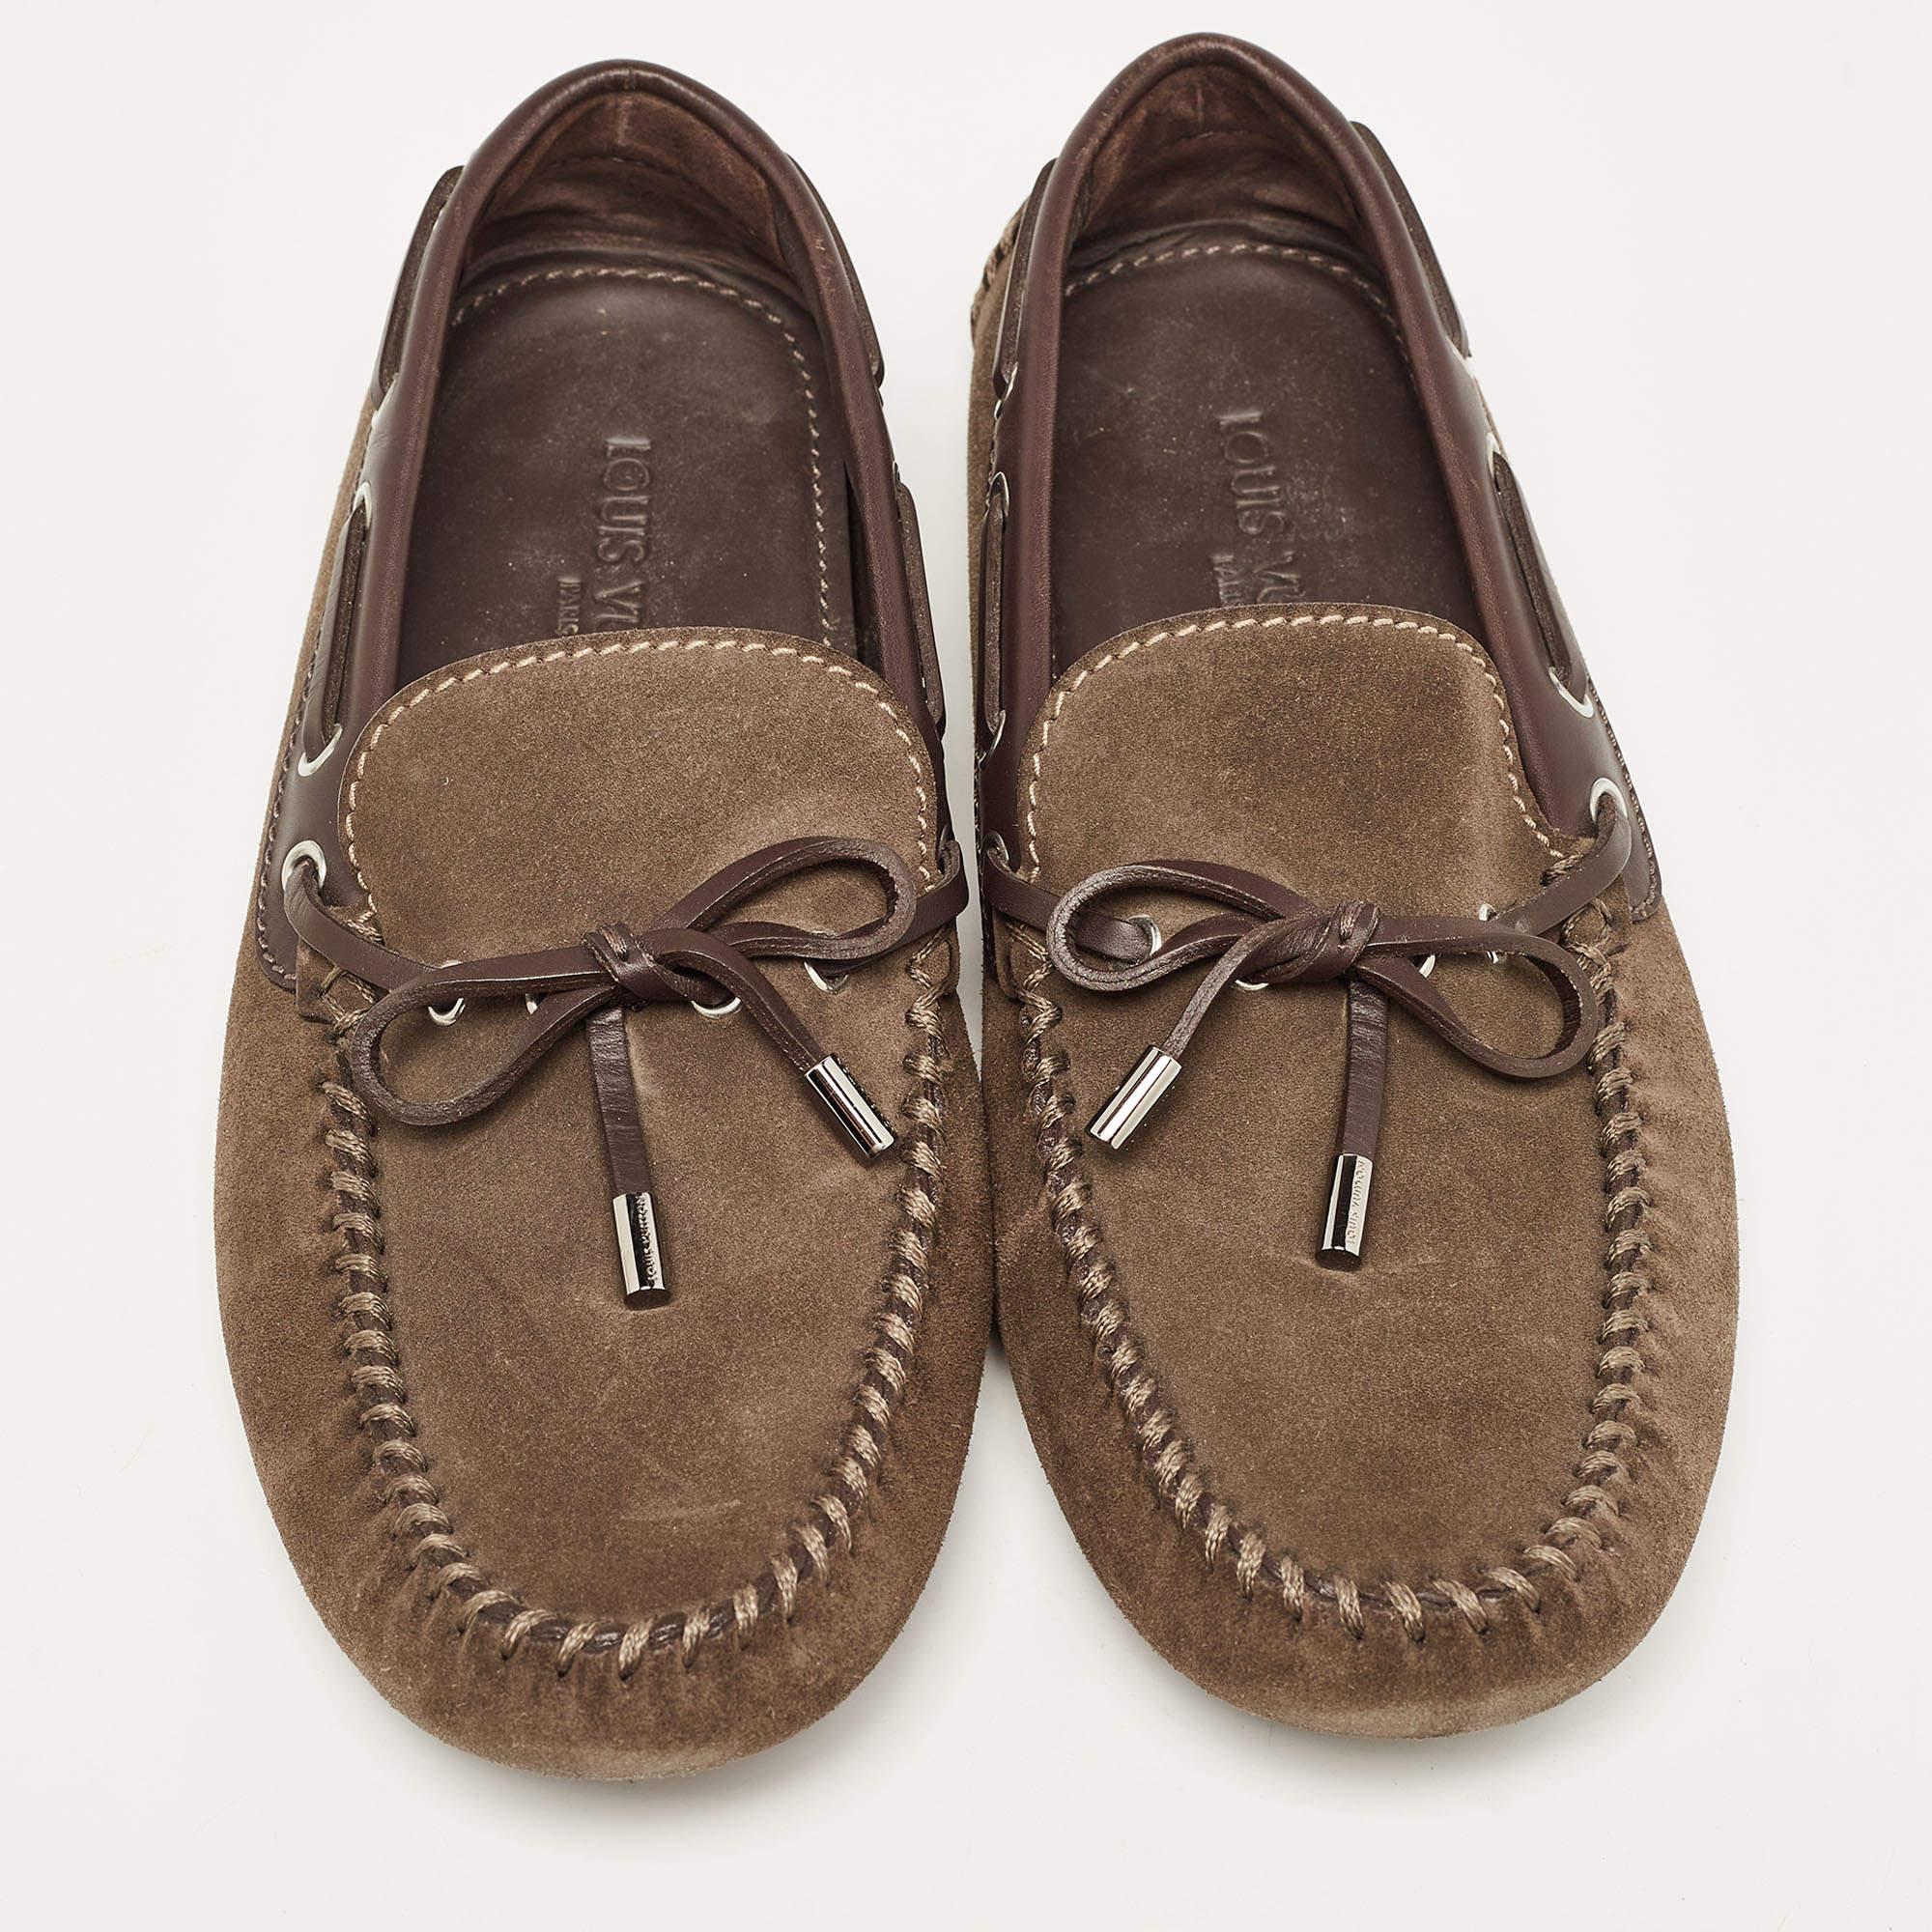 These designer loafers by Louis Vuitton will be your favorite go-to pair for off-duty looks. Crafted using suede & leather, the shoes have little ties on the uppers.

